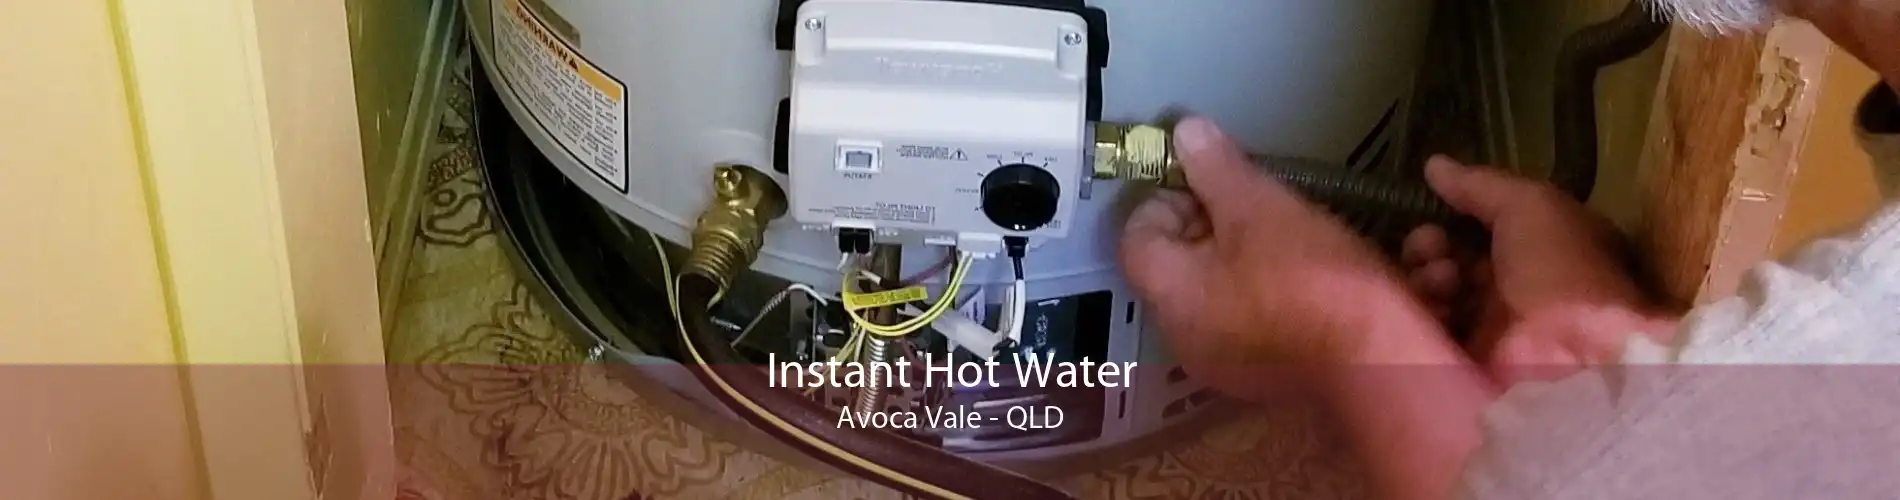 Instant Hot Water Avoca Vale - QLD